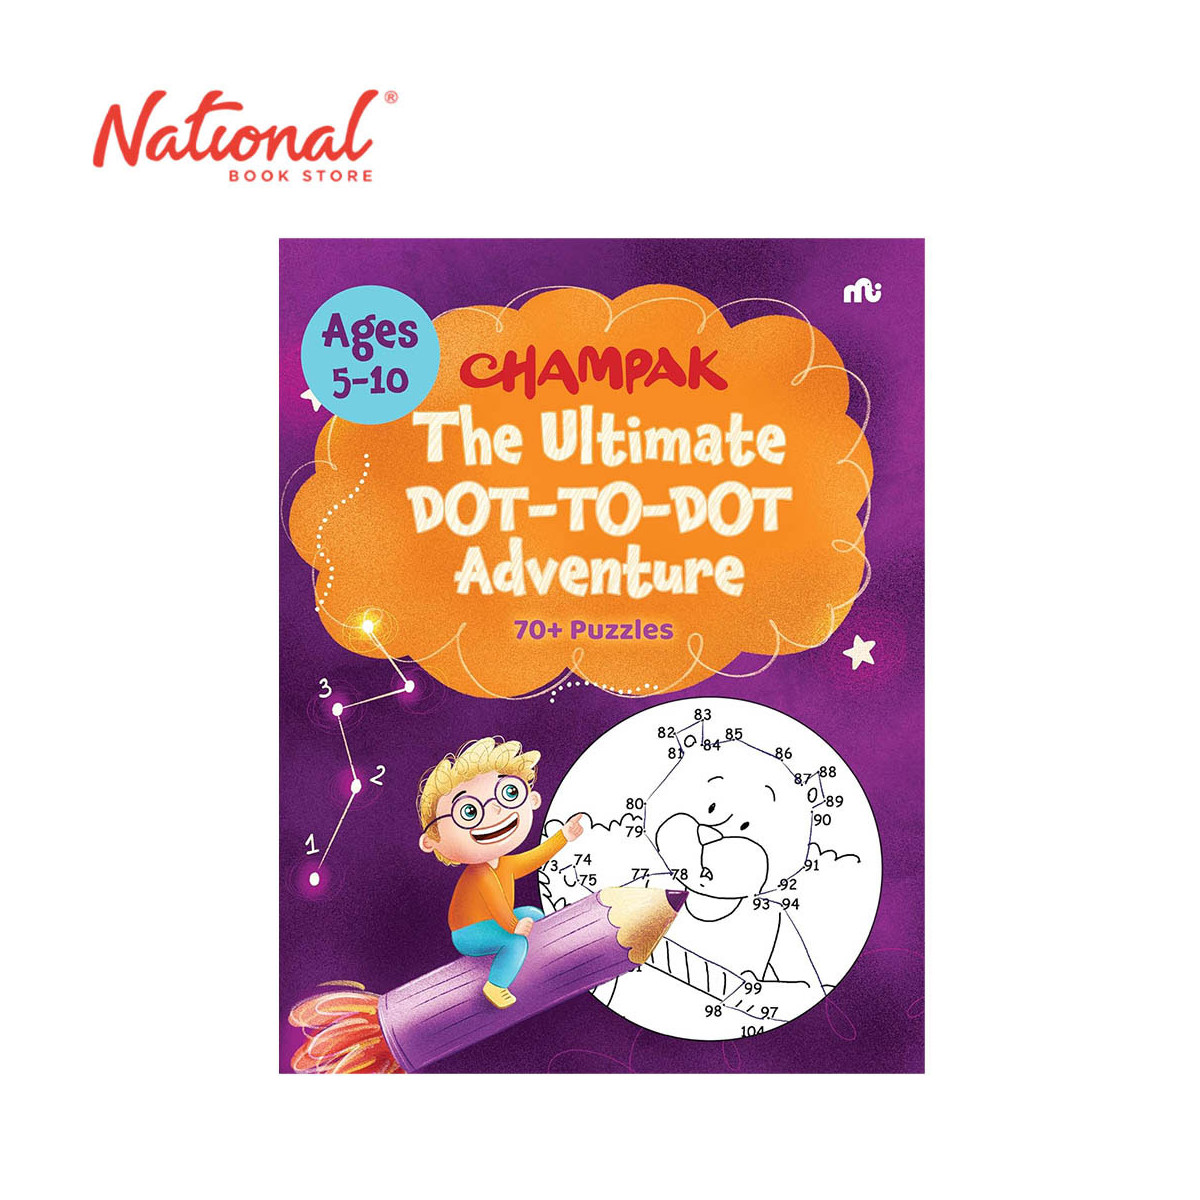 Champak The Ultimate Dot-To-Dot Adventures - Trade Paperback - Activity Books for Kids